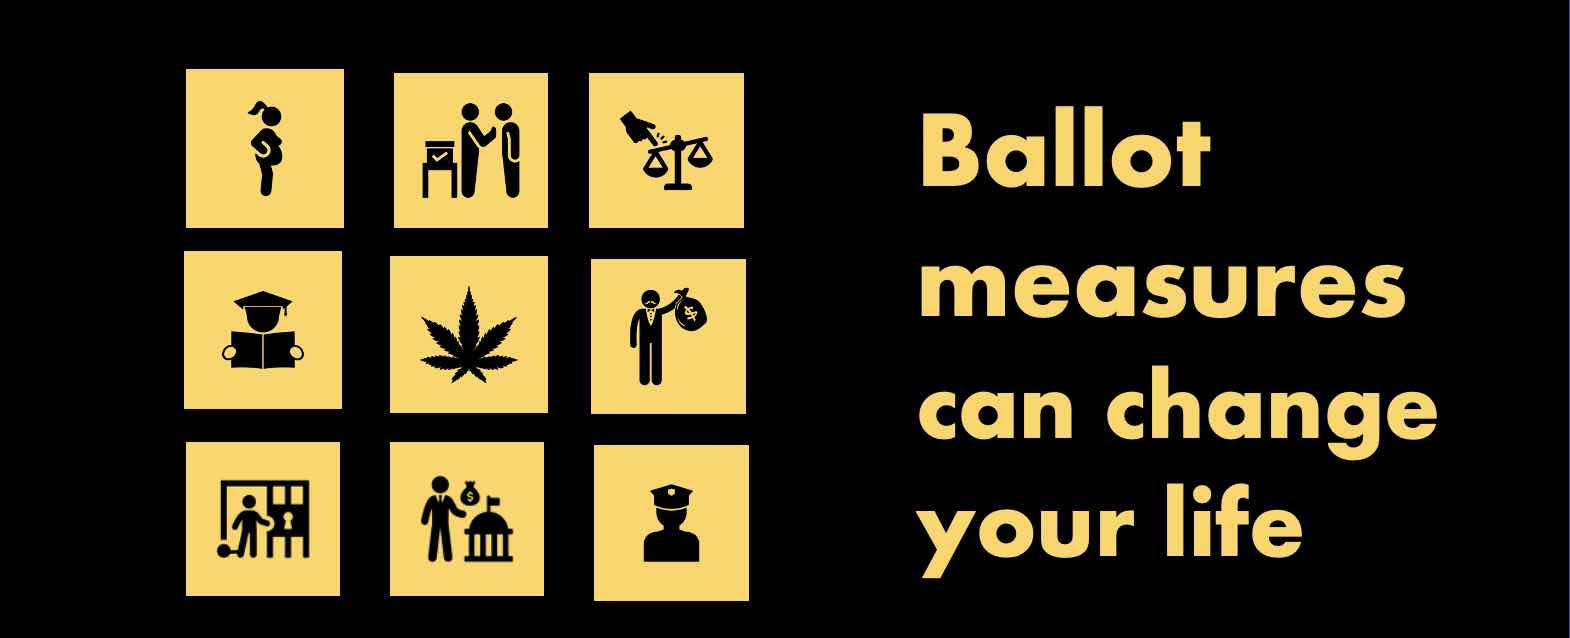 Nine ballot measures that could change your life